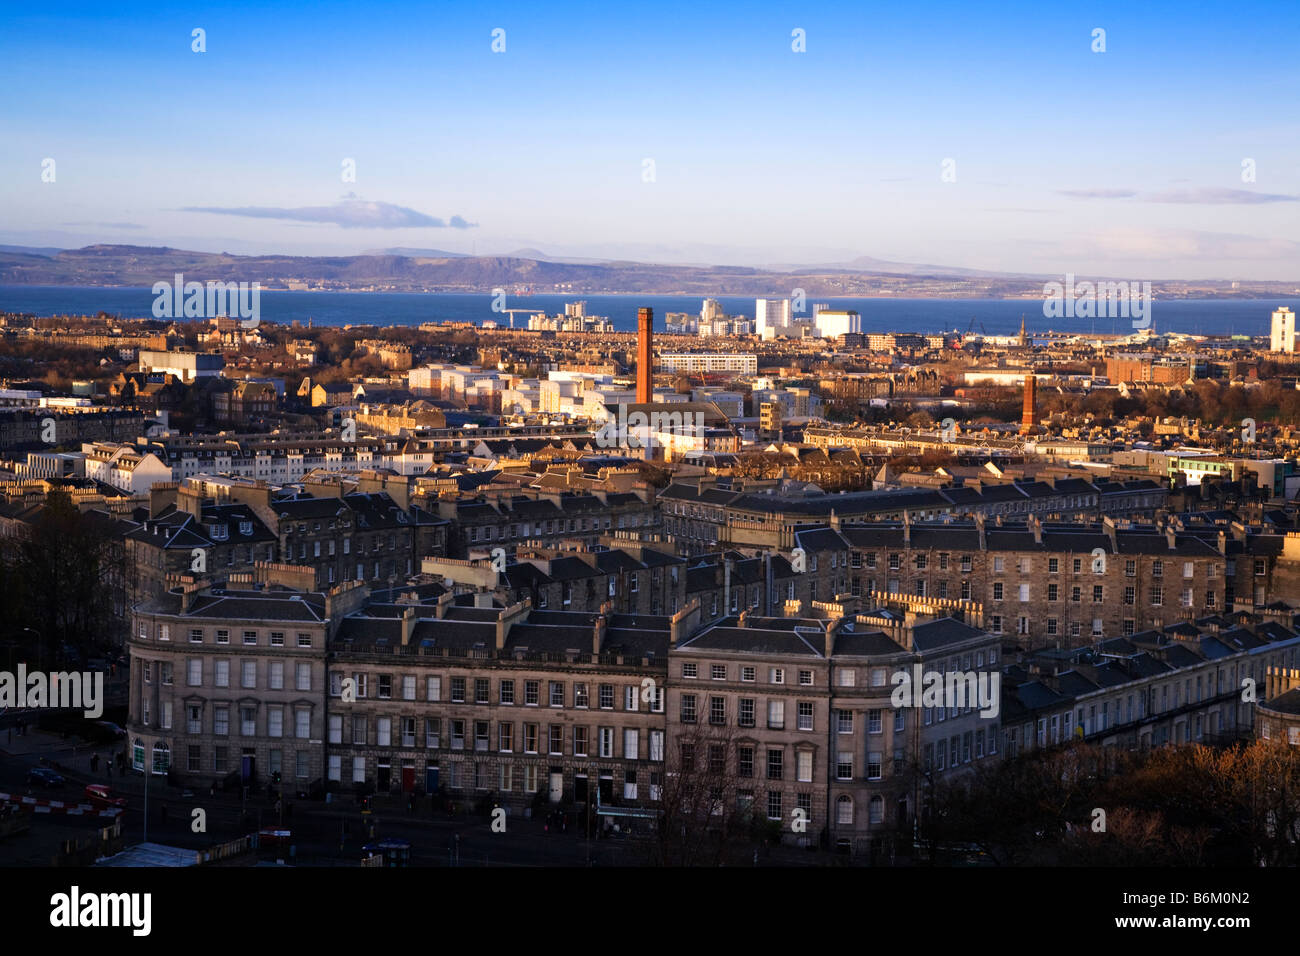 Looking Over Edinburgh New Town and Leith from Calton Hill, City of Edinburgh, Scotland. Stock Photo